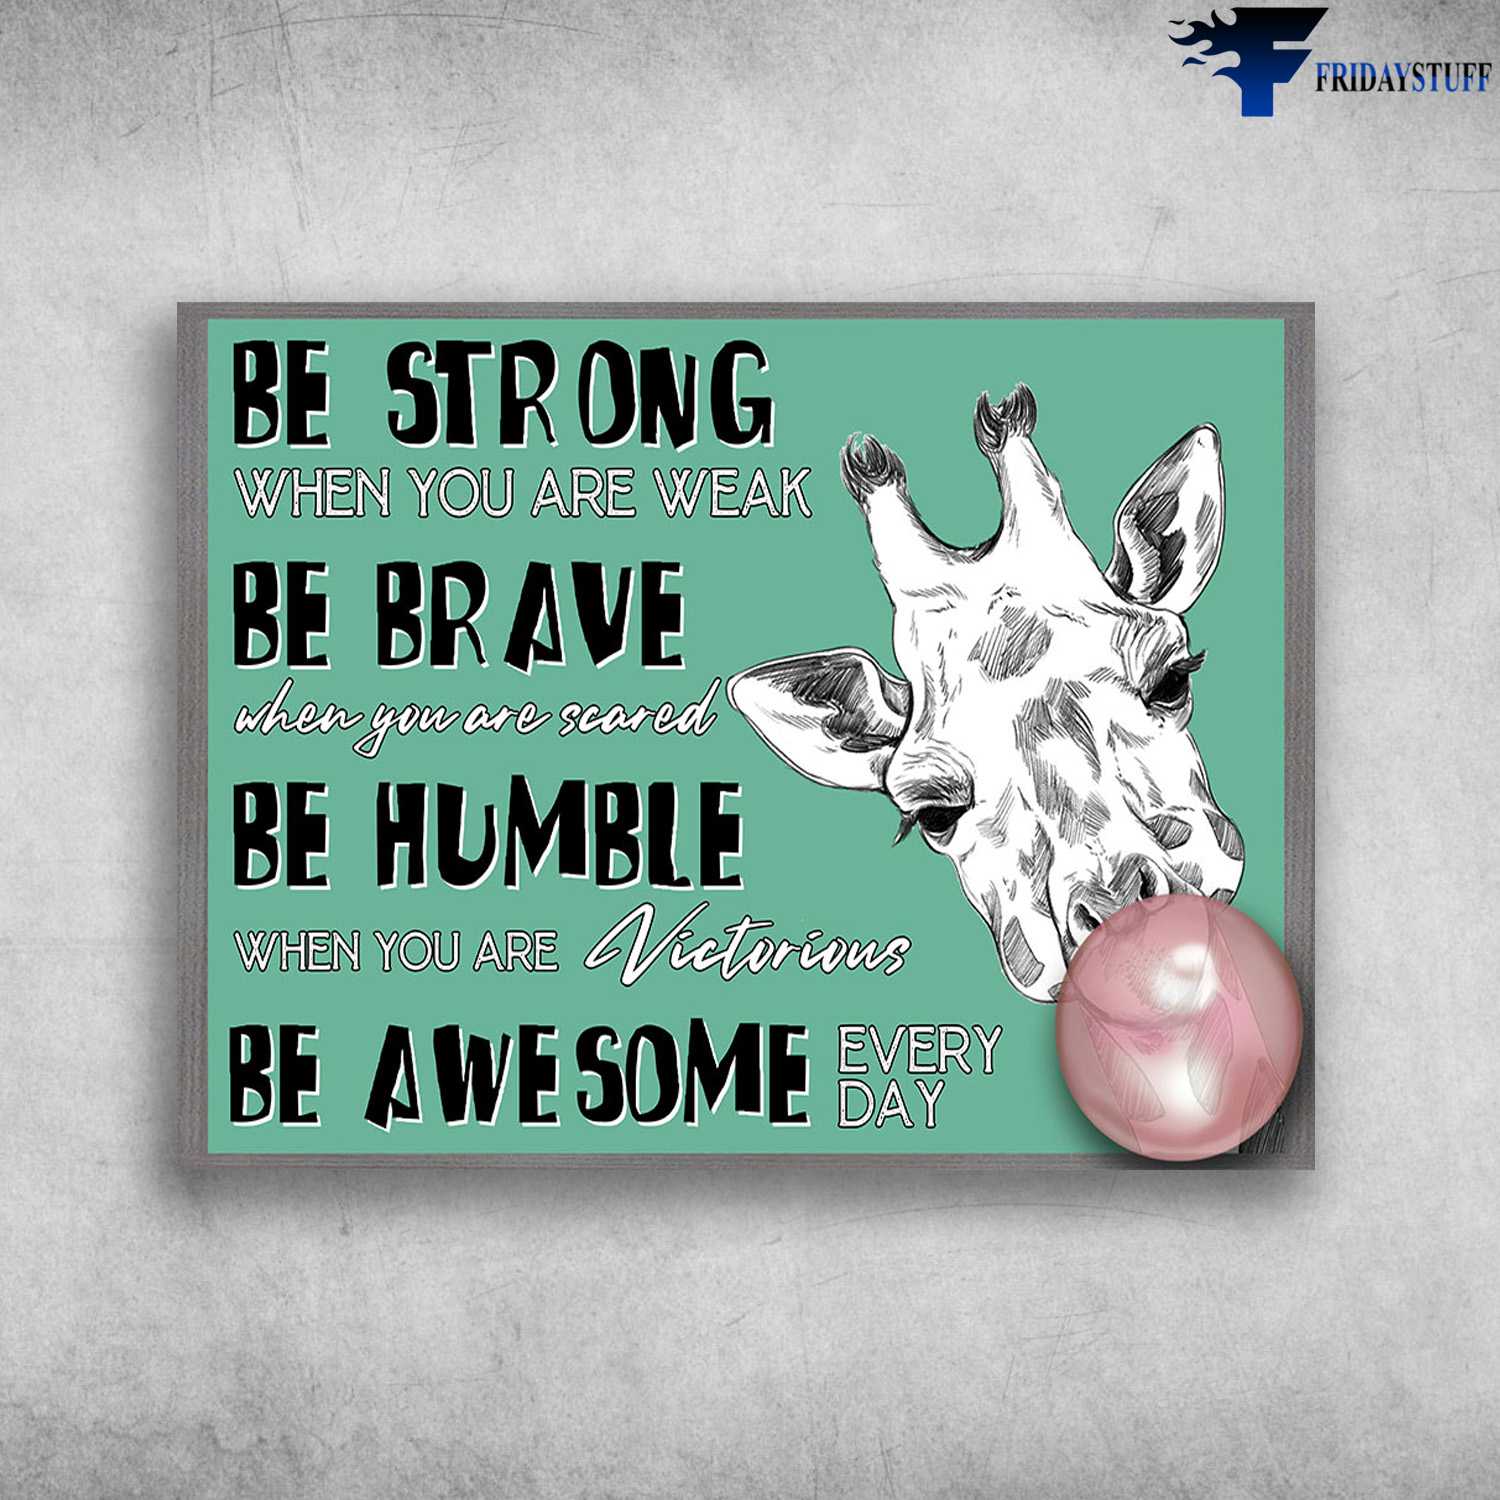 Giraffe Chewing Gum - Be Strong When You Are Weak, Be Brave When You Are Scared, Be Humble When You Are Victorious, Be Awesome Every Day